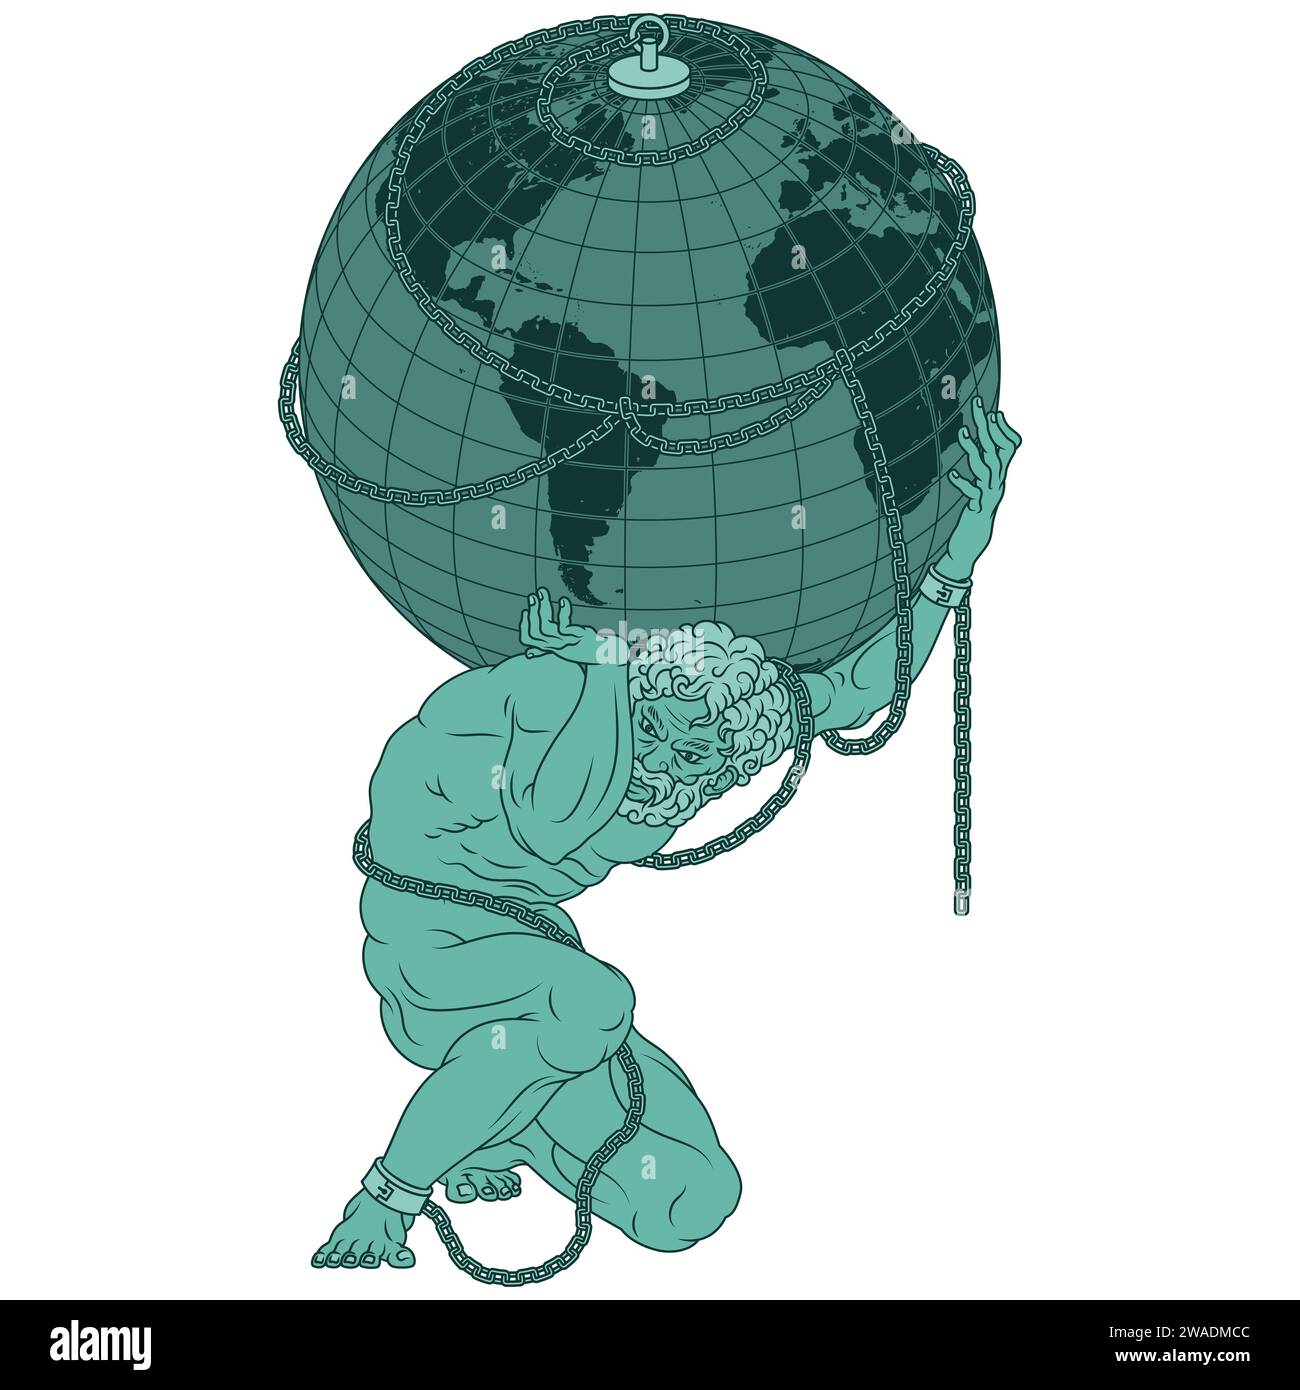 Vector design of the titan Atlas chained to the planet Earth, titan from Greek mythology holding the earth sphere Stock Vector